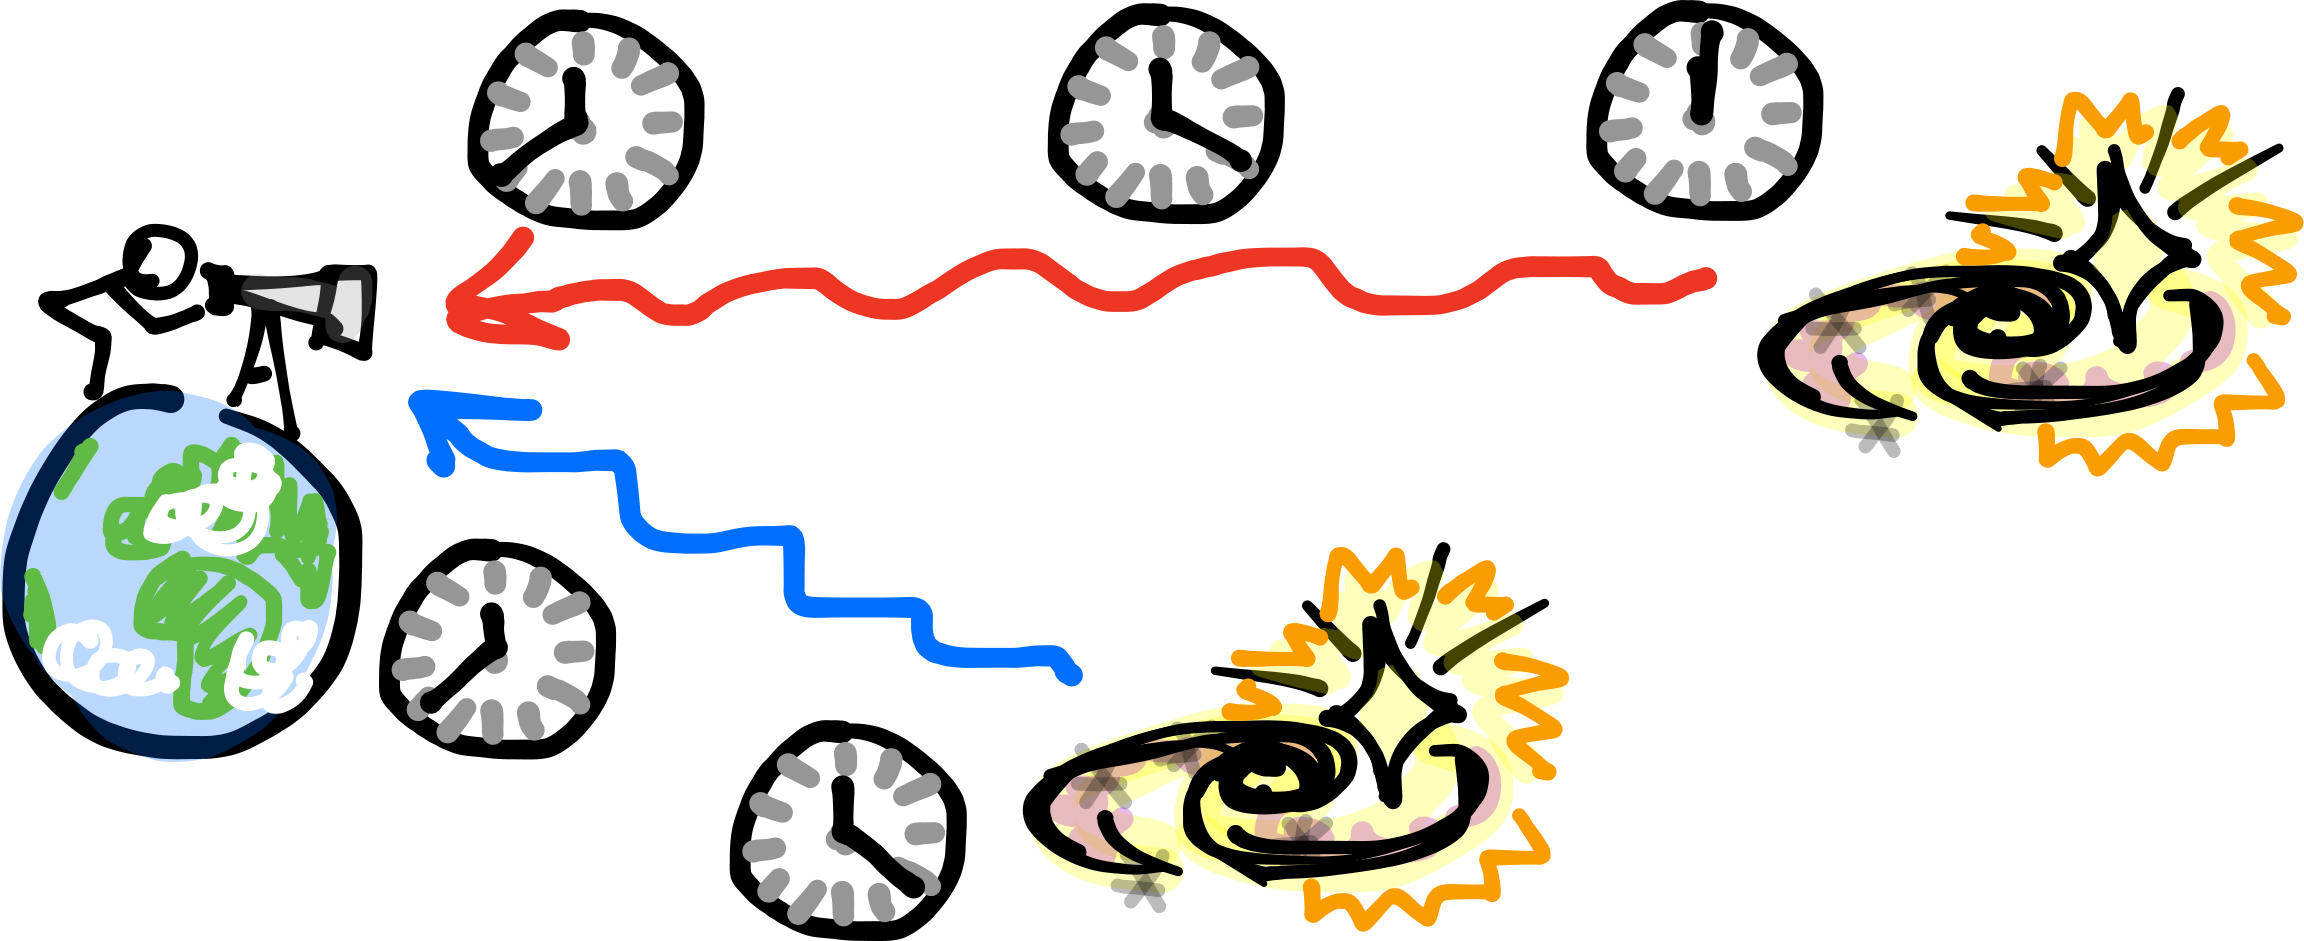 alt="Cartoon of stick figure looking through telescope on earth at distant galaxies, with clocks indicating that the light takes longer to travel from the more distant galaxies."